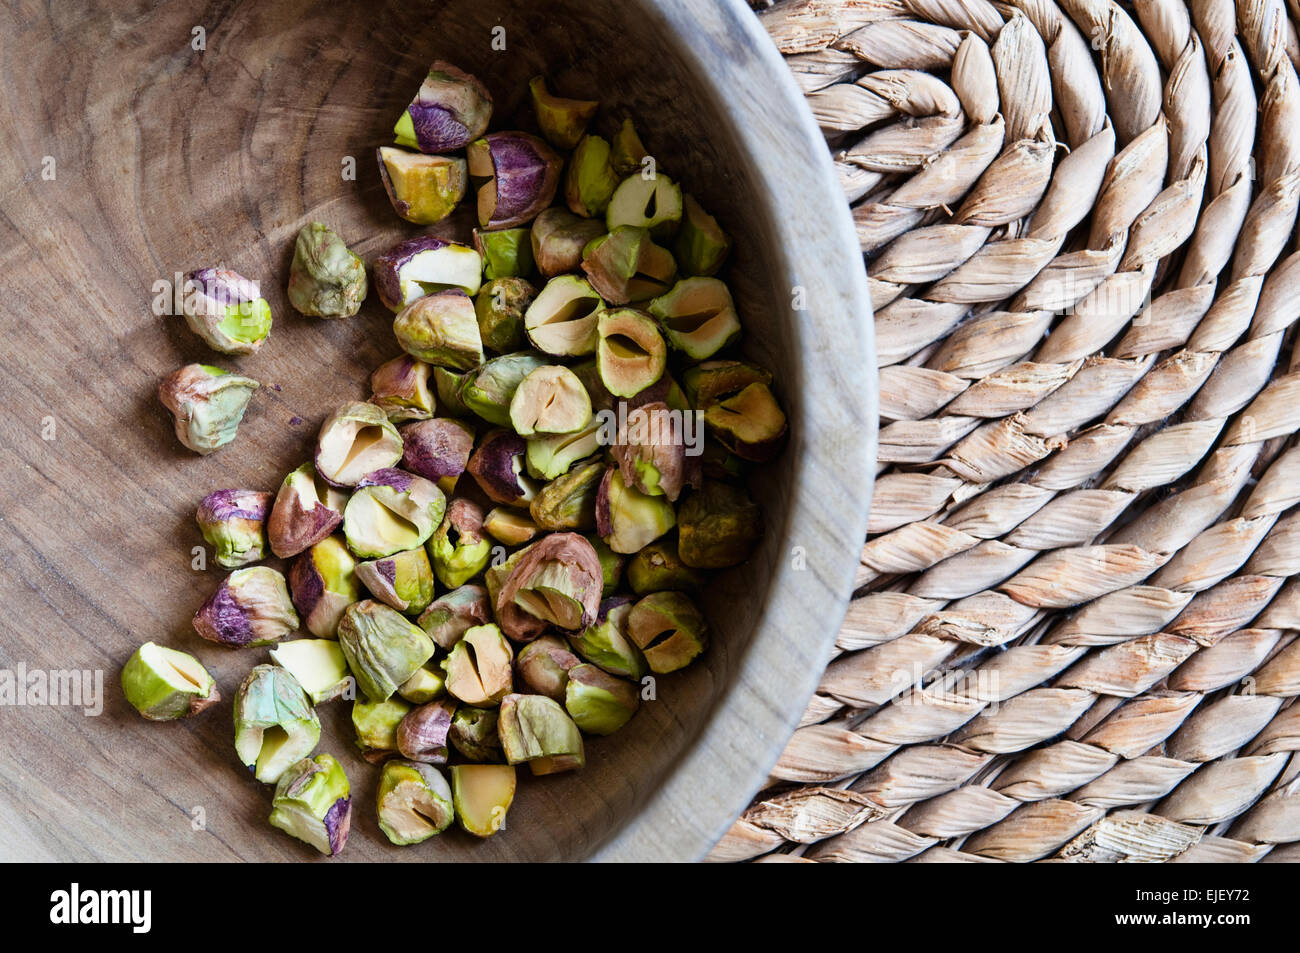 Overhead view of roughly chopped  pistachios in an olive wood bowl on a rush mat. Stock Photo